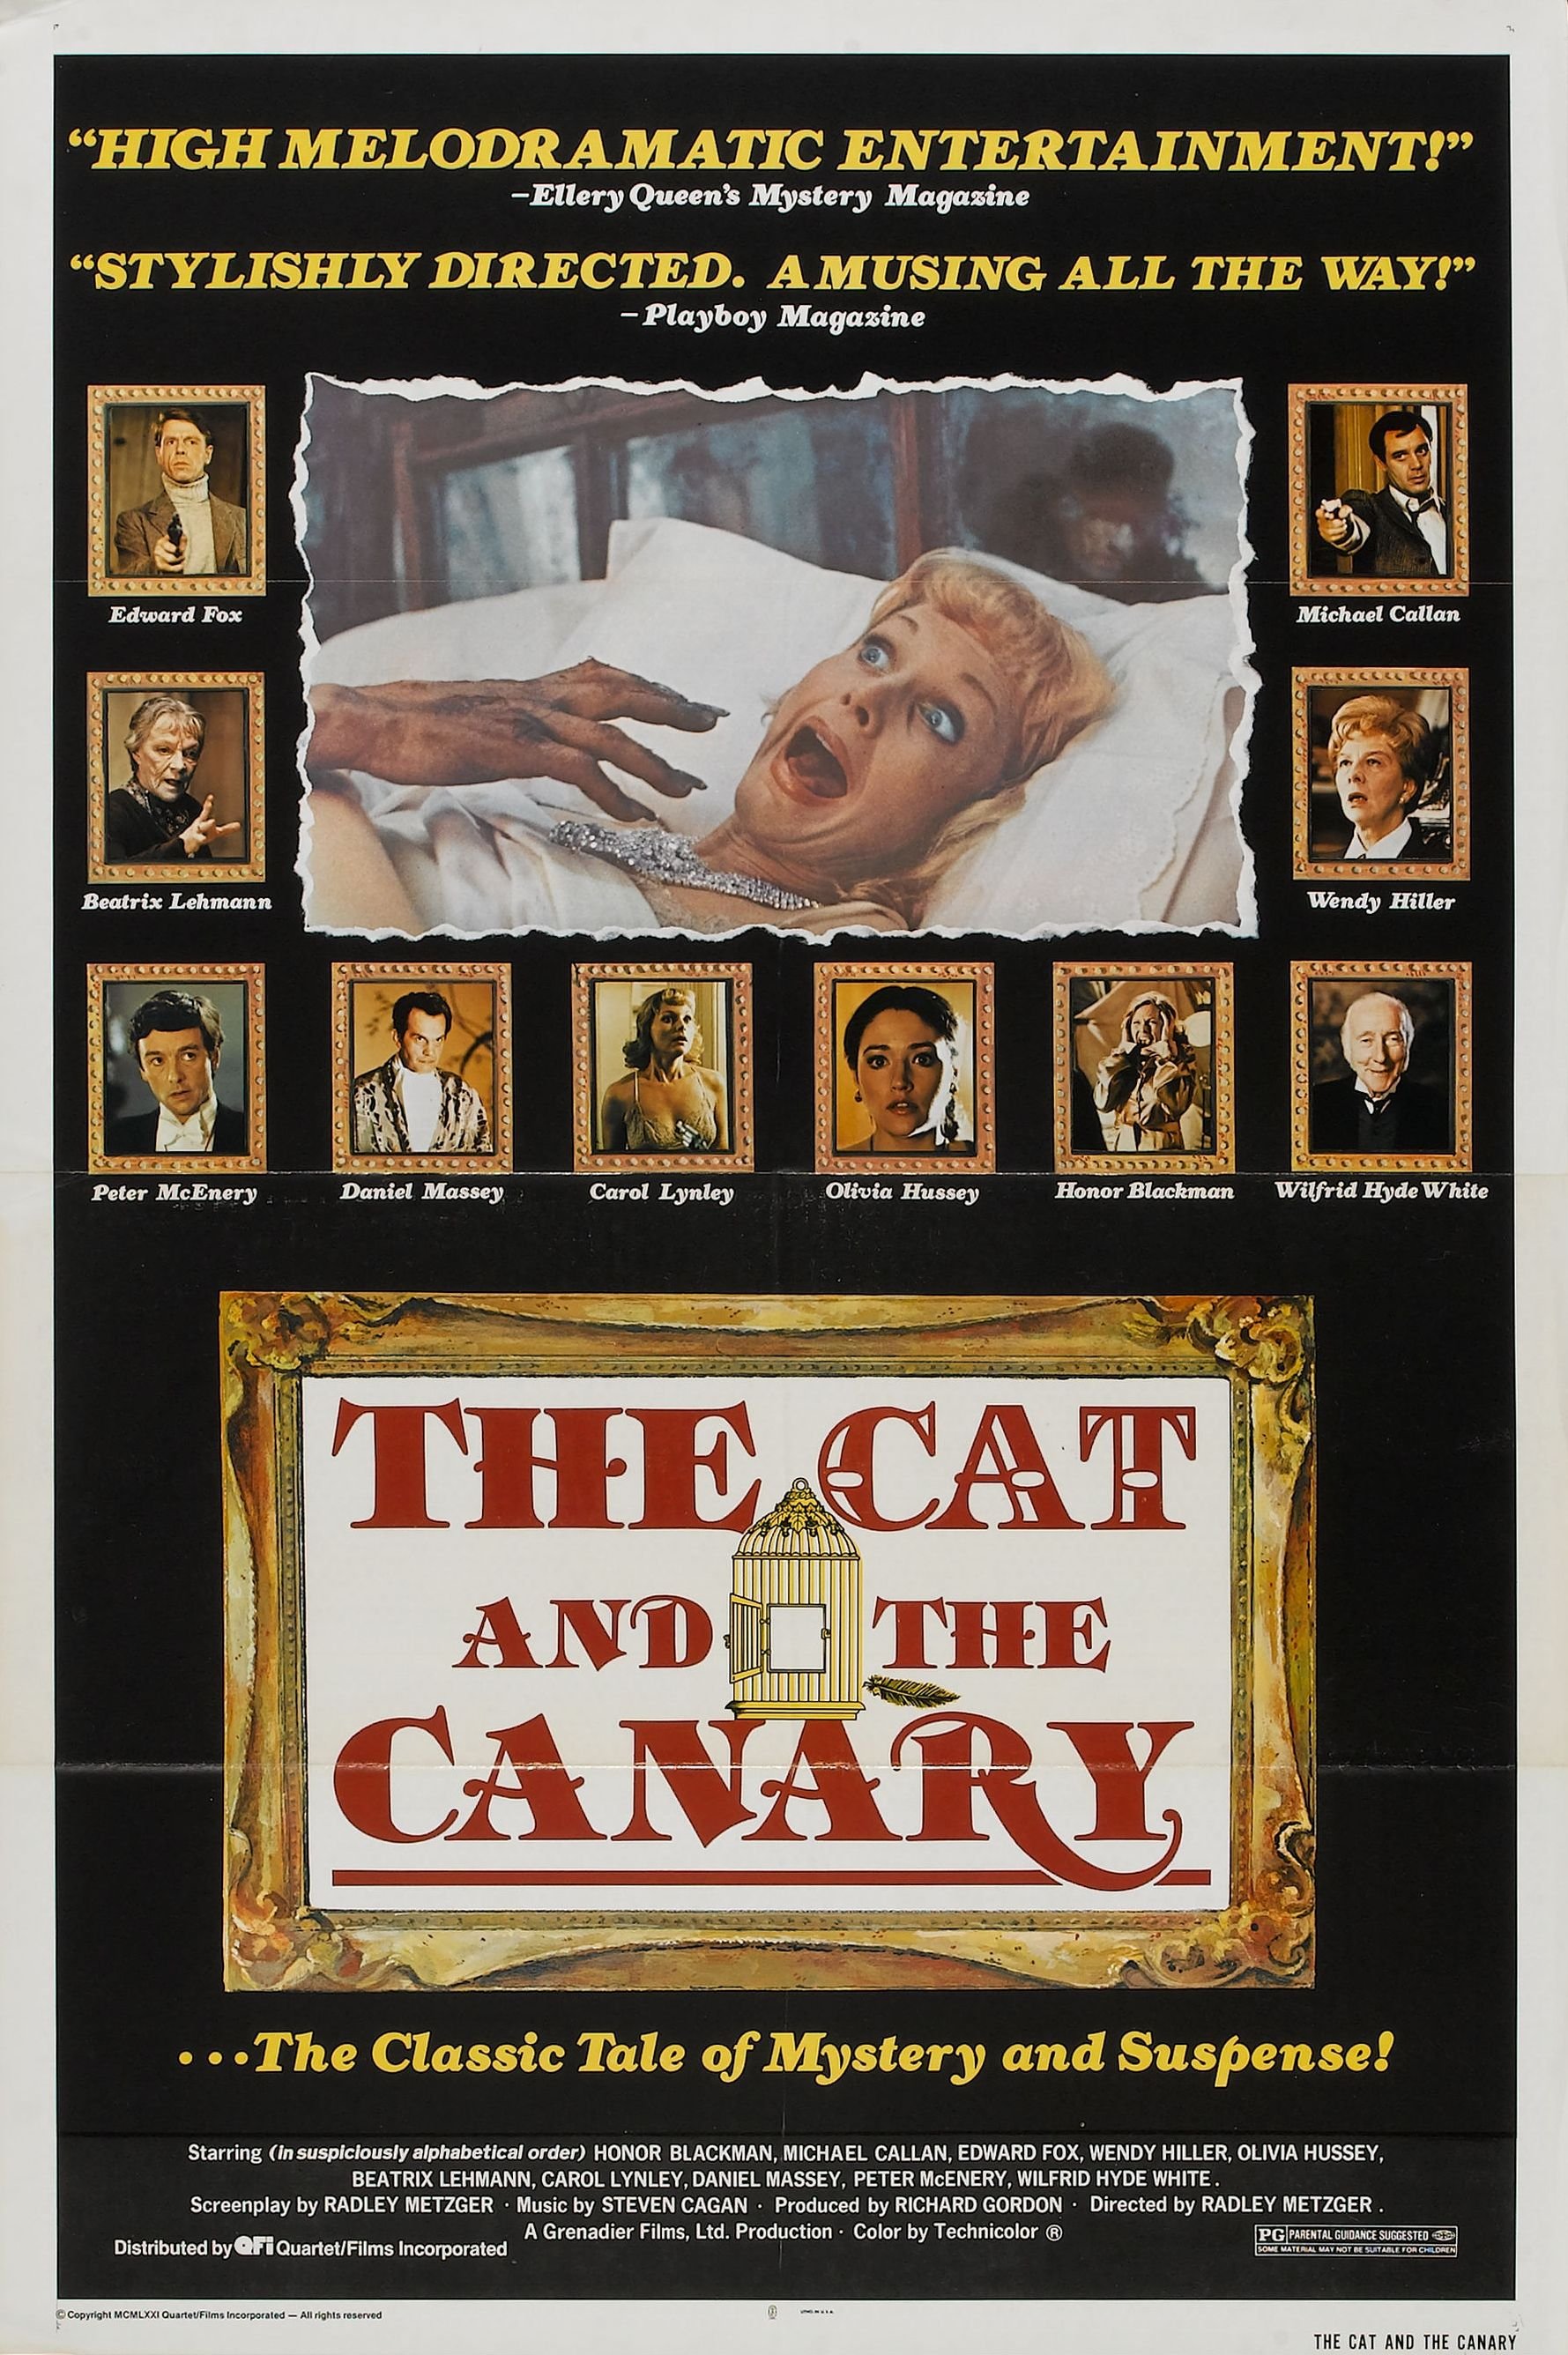 Poster of the movie The Cat and the Canary